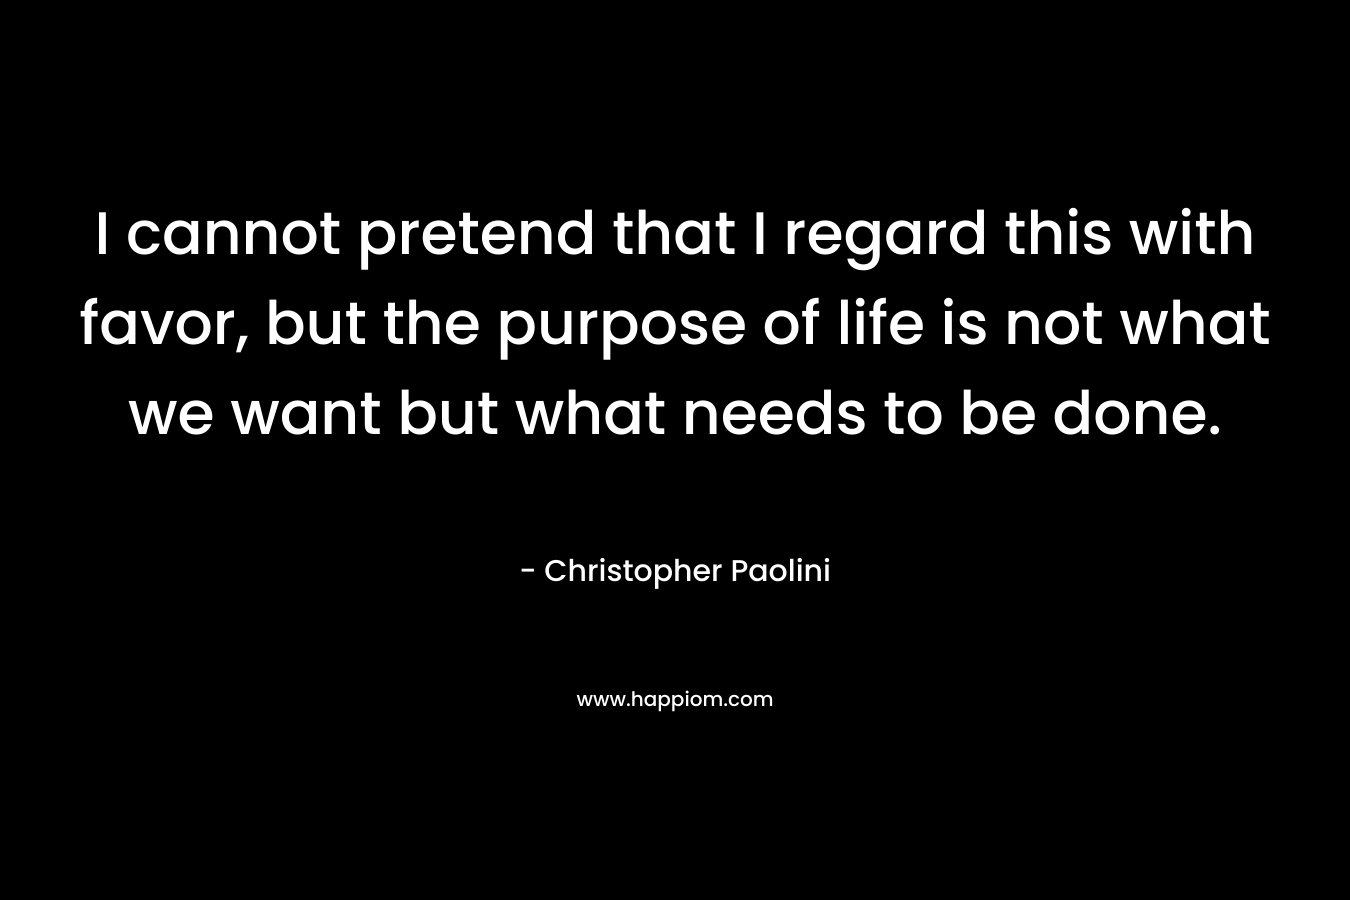 I cannot pretend that I regard this with favor, but the purpose of life is not what we want but what needs to be done.